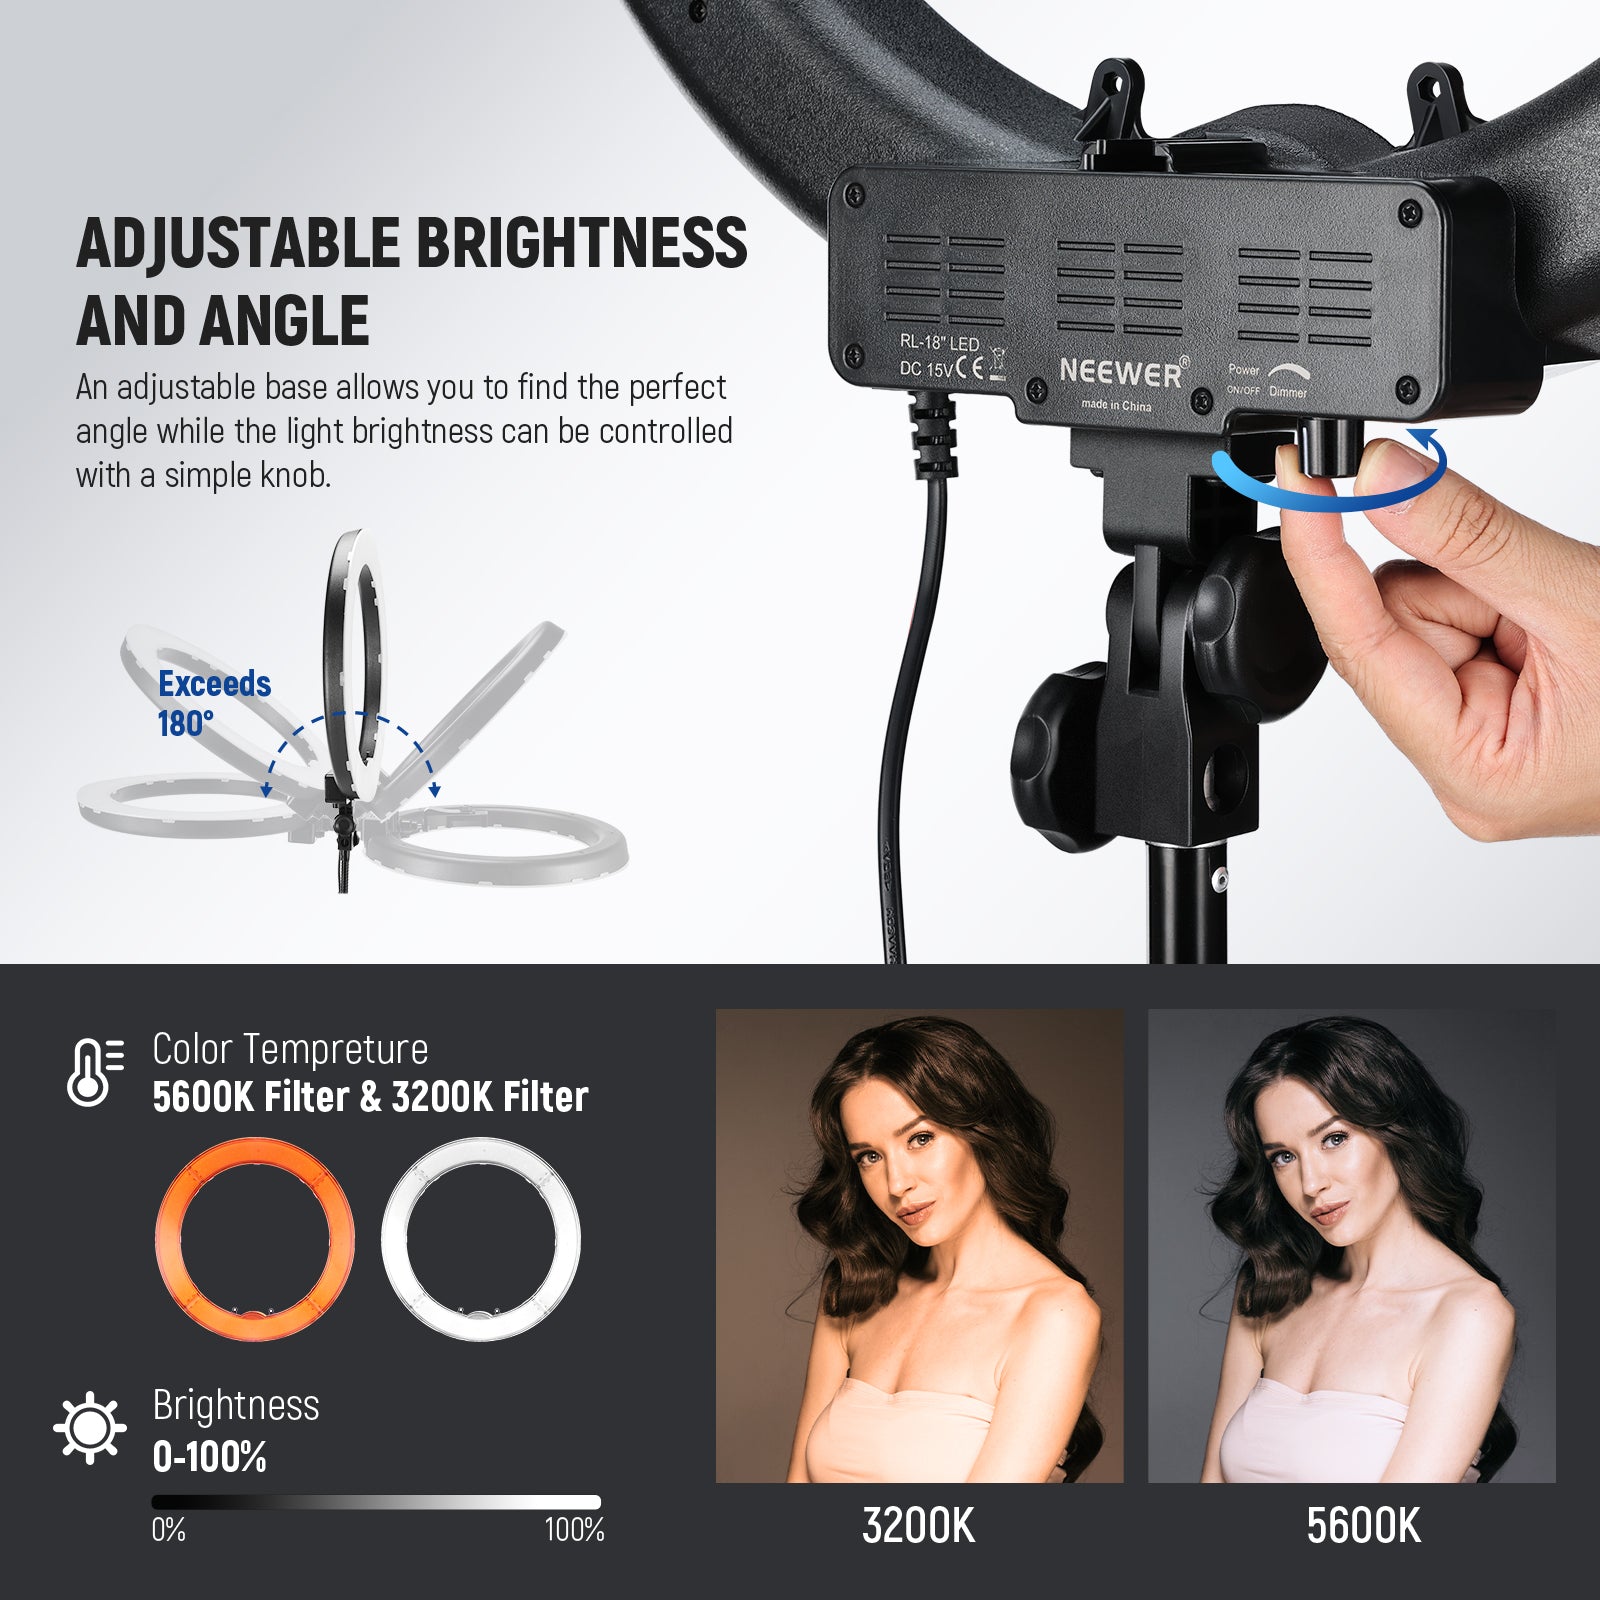 Hair depot - Limited Time Deal! 18” Ring Light Just $39.99